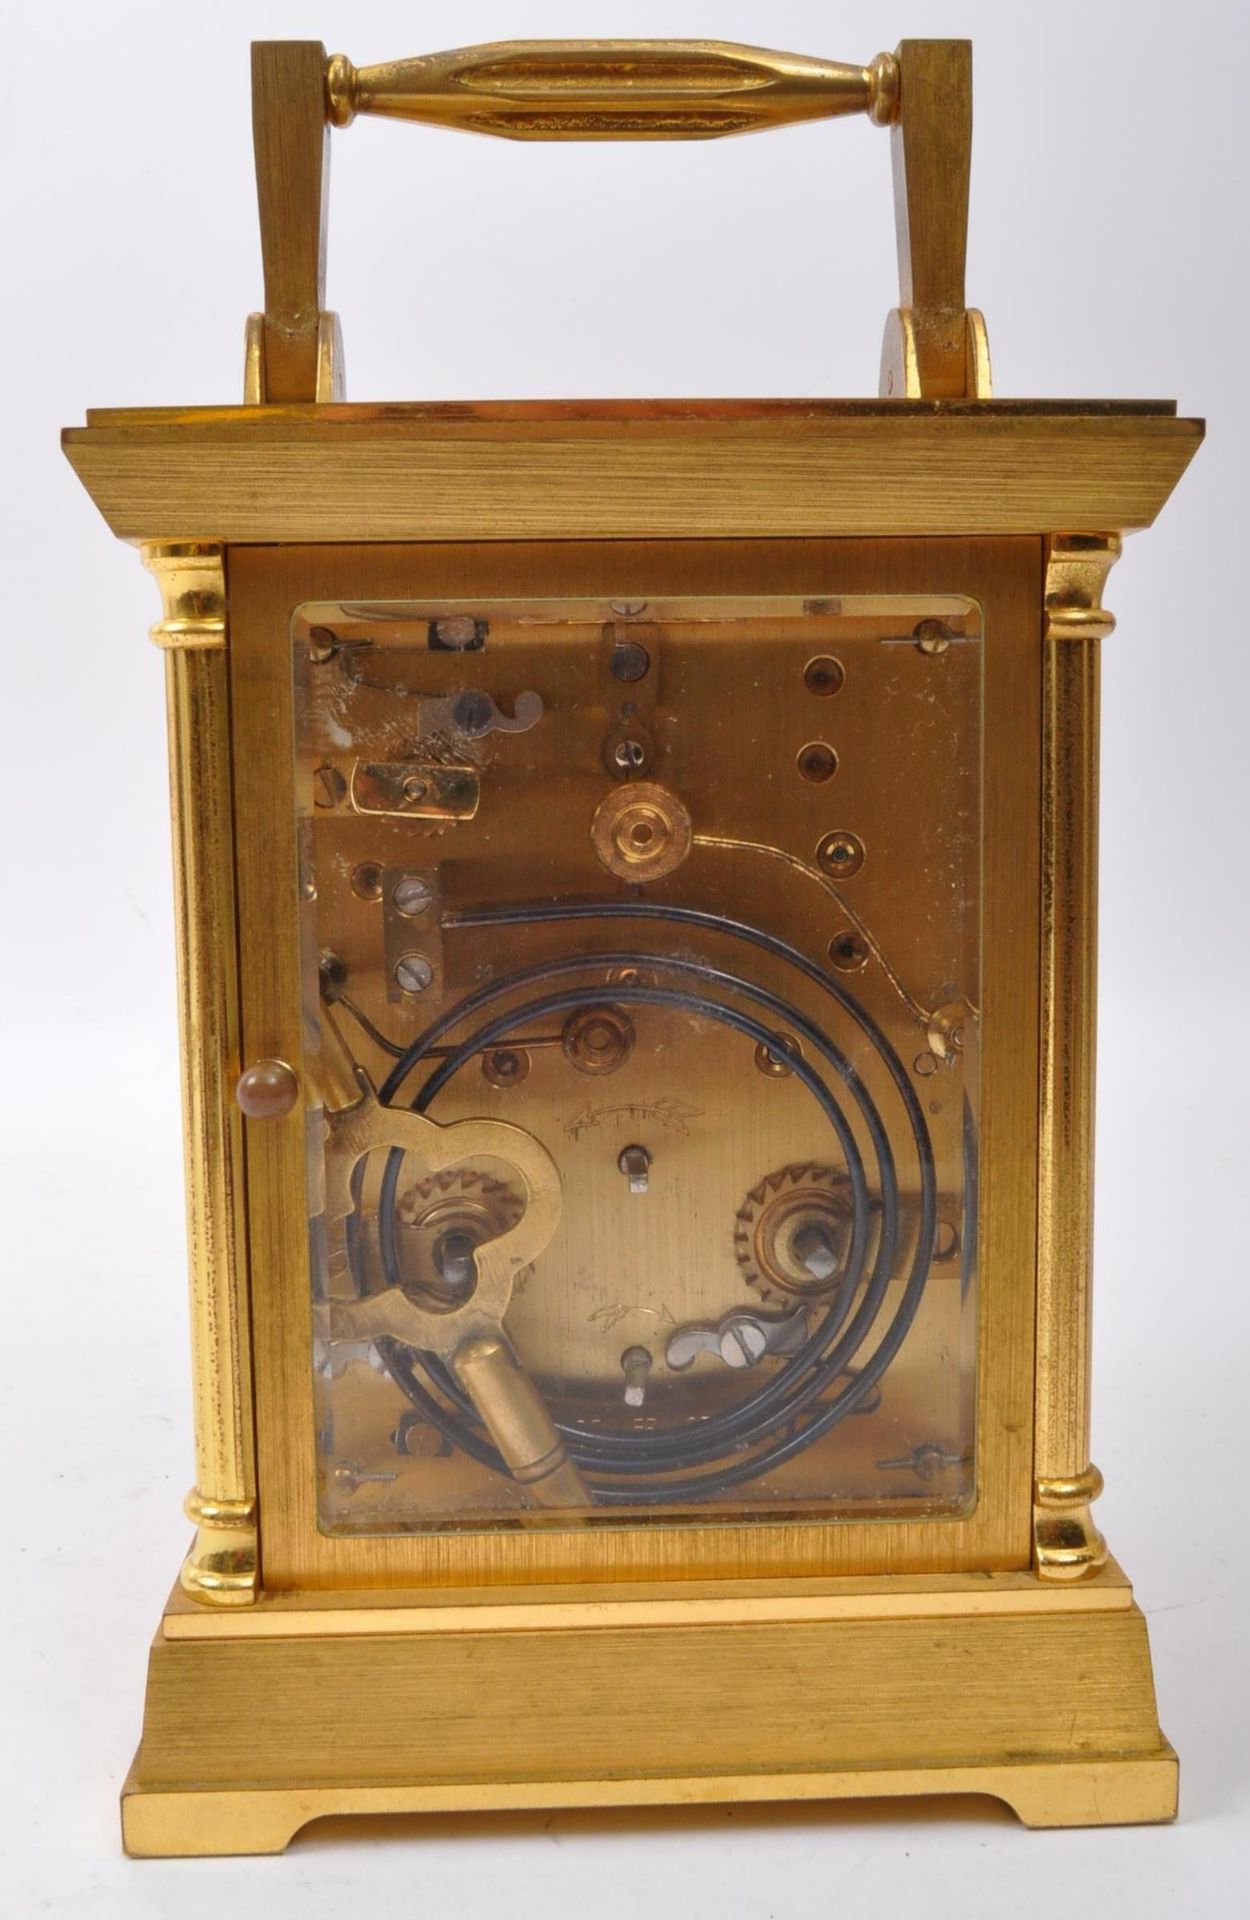 DENT OF LONDON - BRASS GILDED CARRIAGE CLOCK - Image 6 of 8